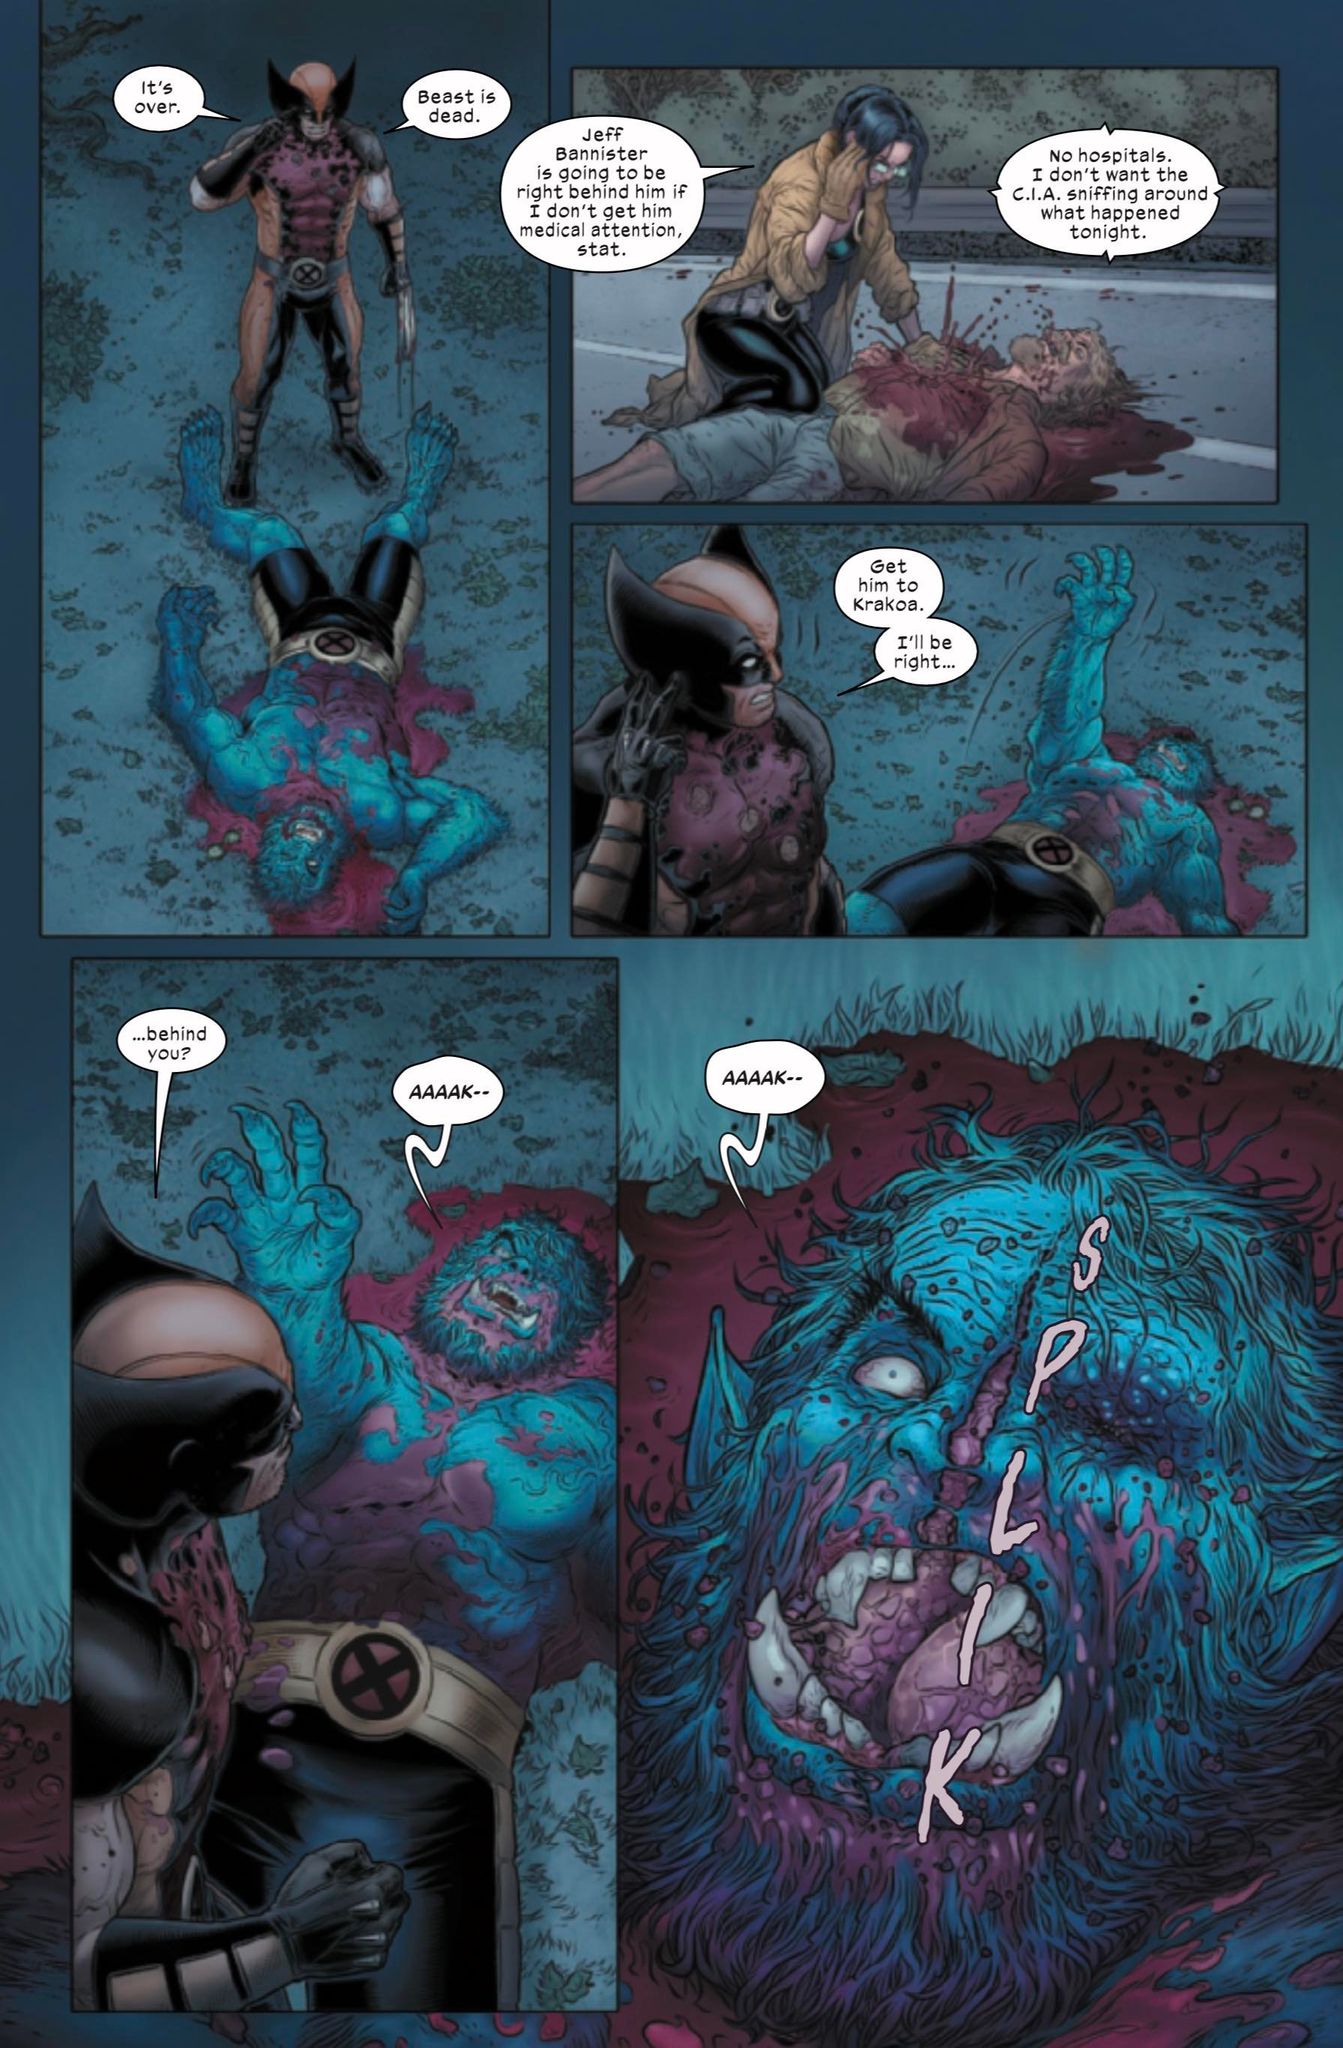 Beast booby-traps his corpse (from Wolverine #31)